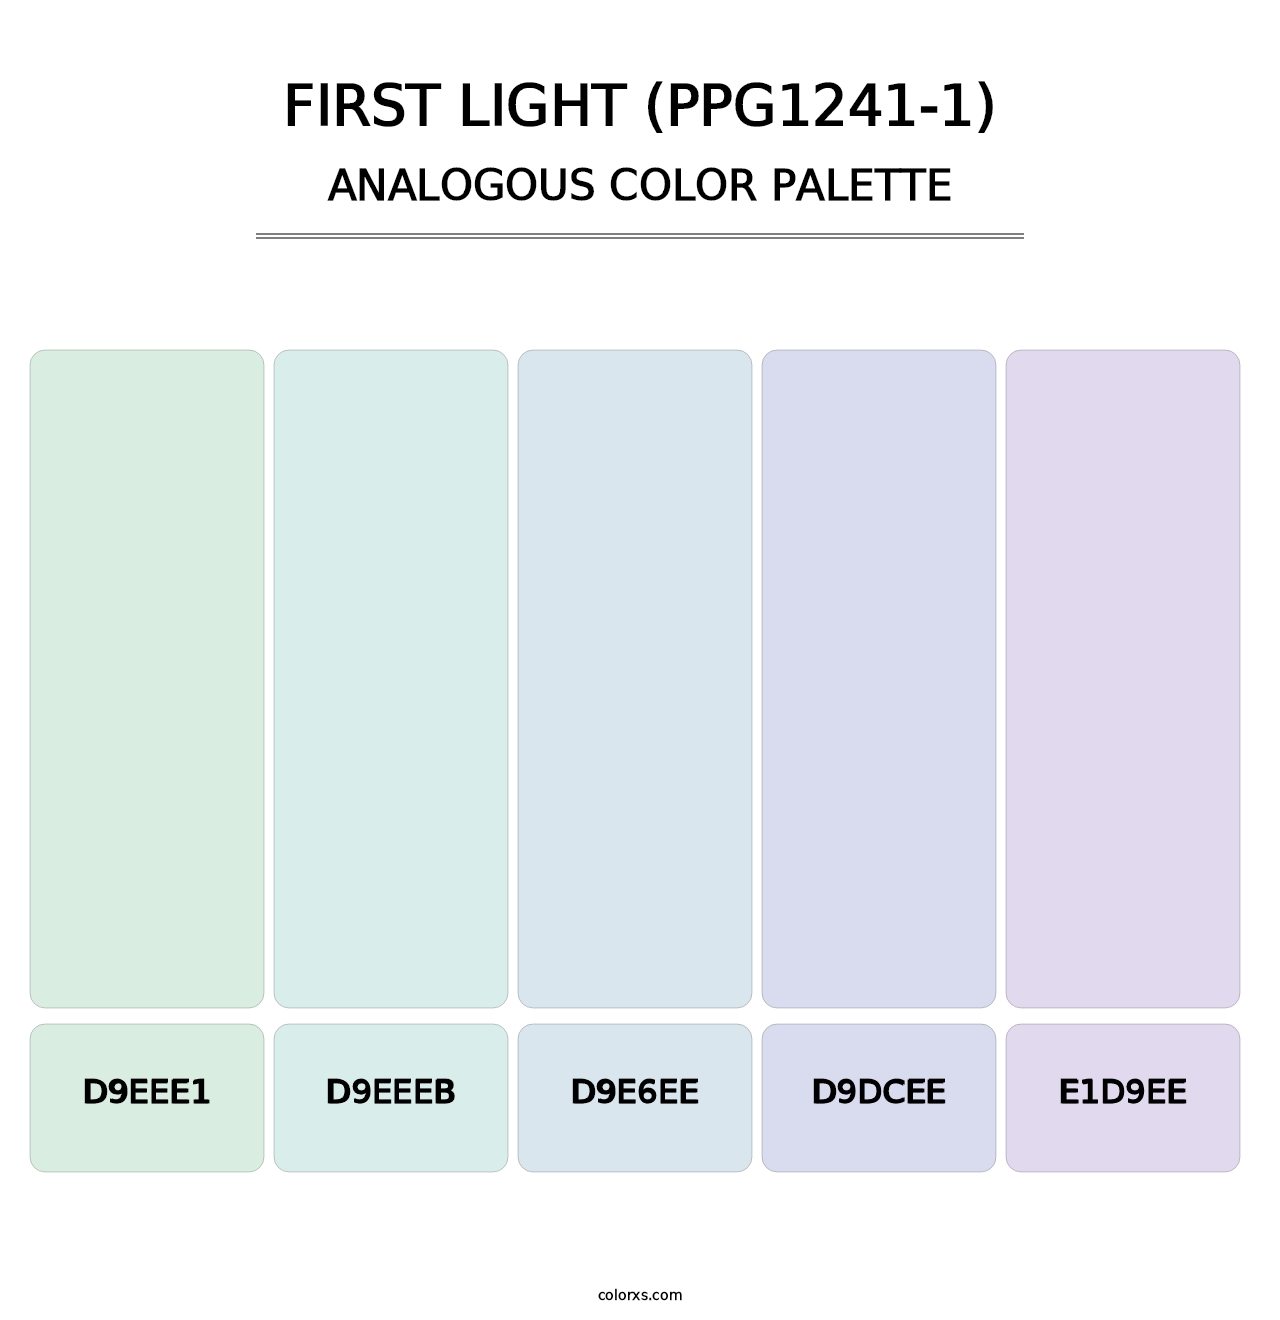 First Light (PPG1241-1) - Analogous Color Palette